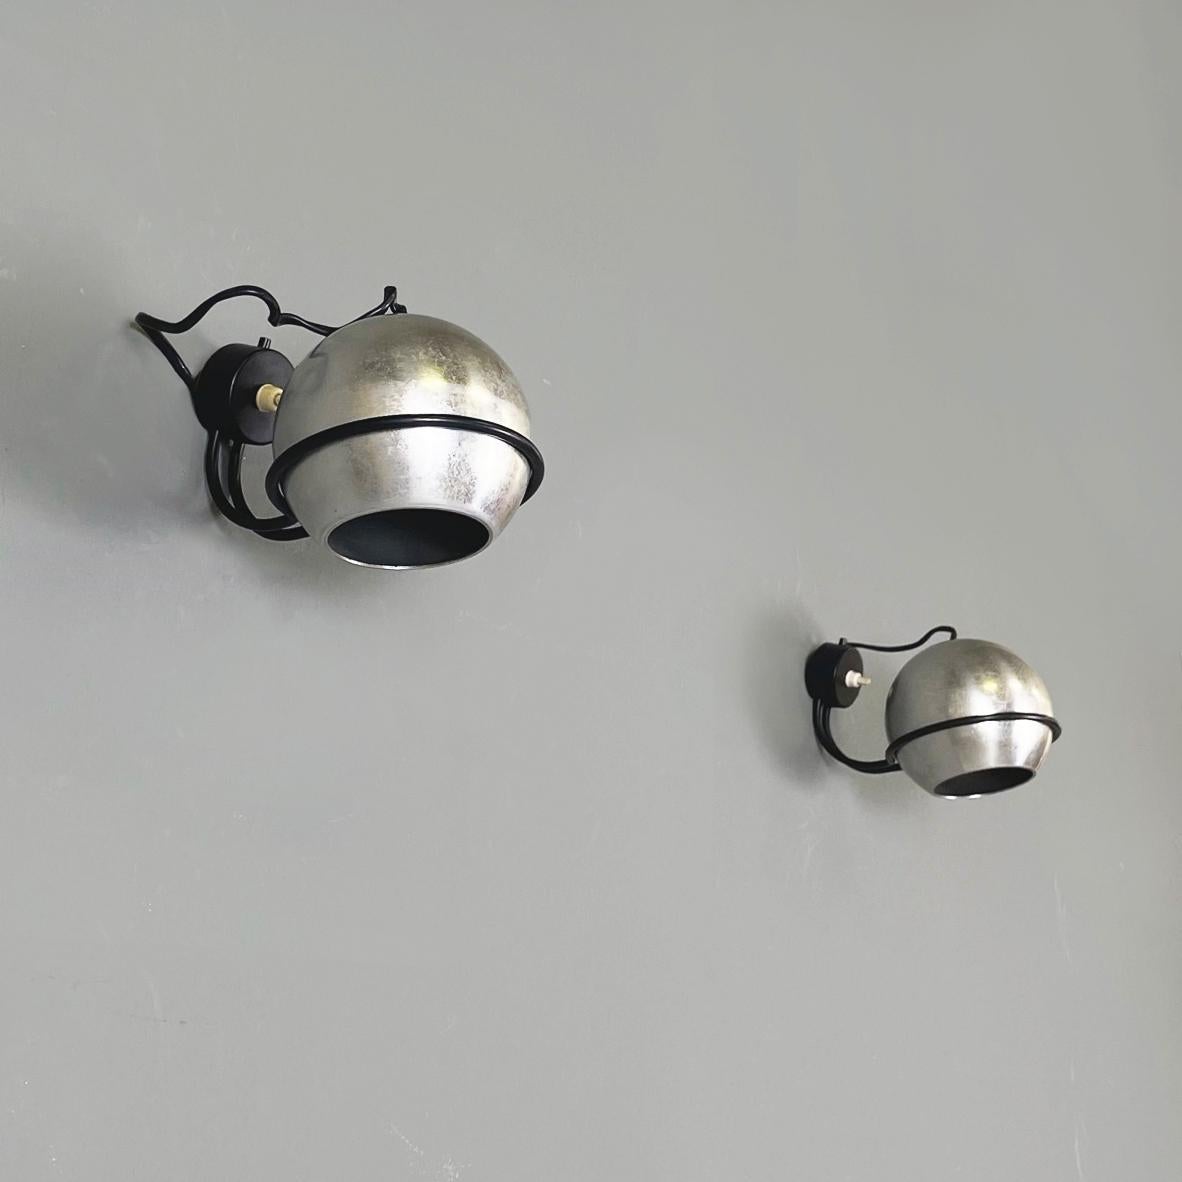 Italian mid-century modern steel Wall light nr. 232 by Gino Sarfatti for Arteluce, 1960s
Pair of wall lights mod nr. 232 with a round metal base. The spherical steel diffuser is supported by a black painted metal rod structure. The switch is located